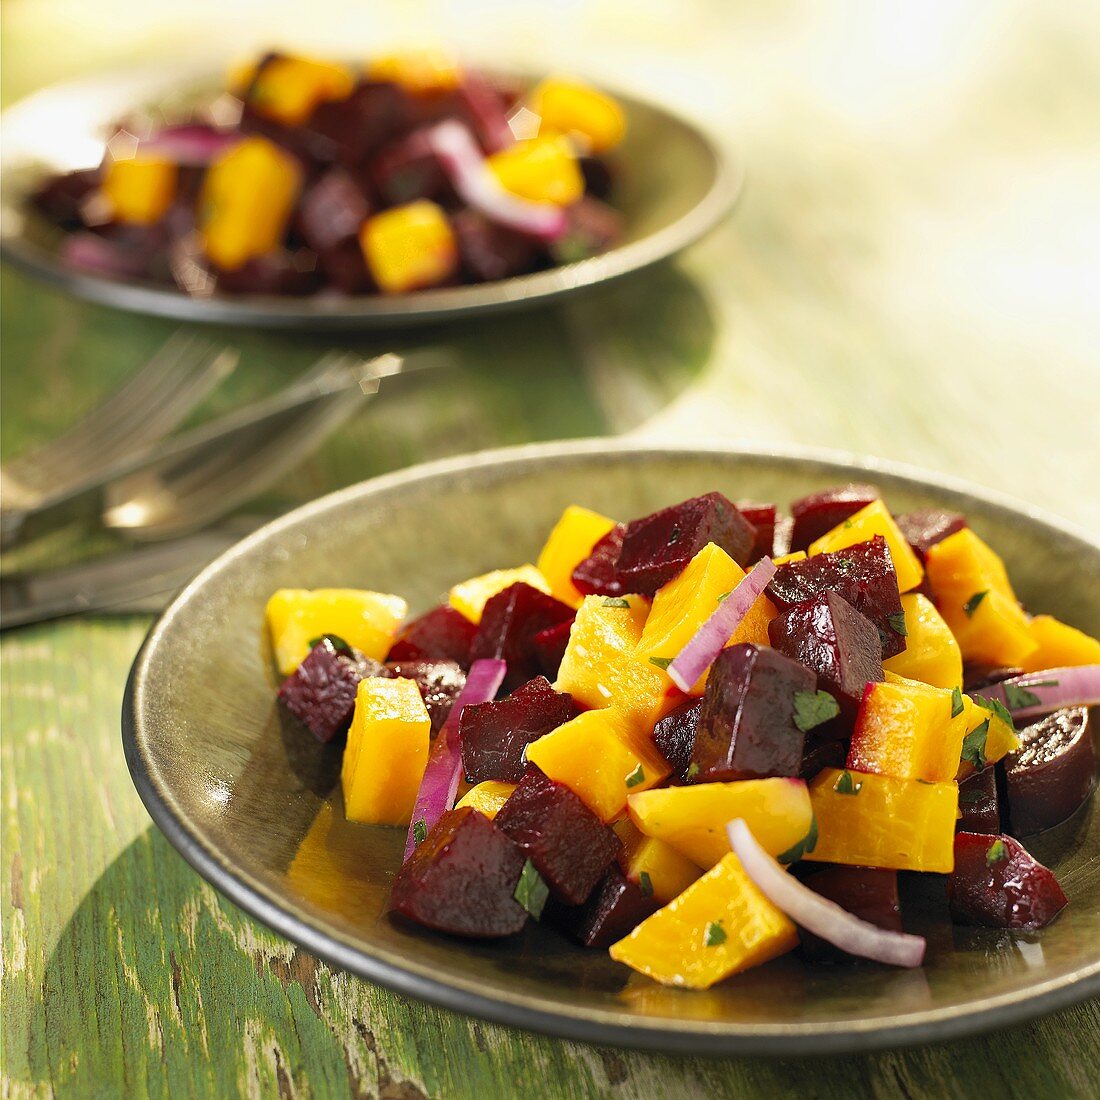 Red and Golden Beet Salad with Red Onion Served on Green Plates